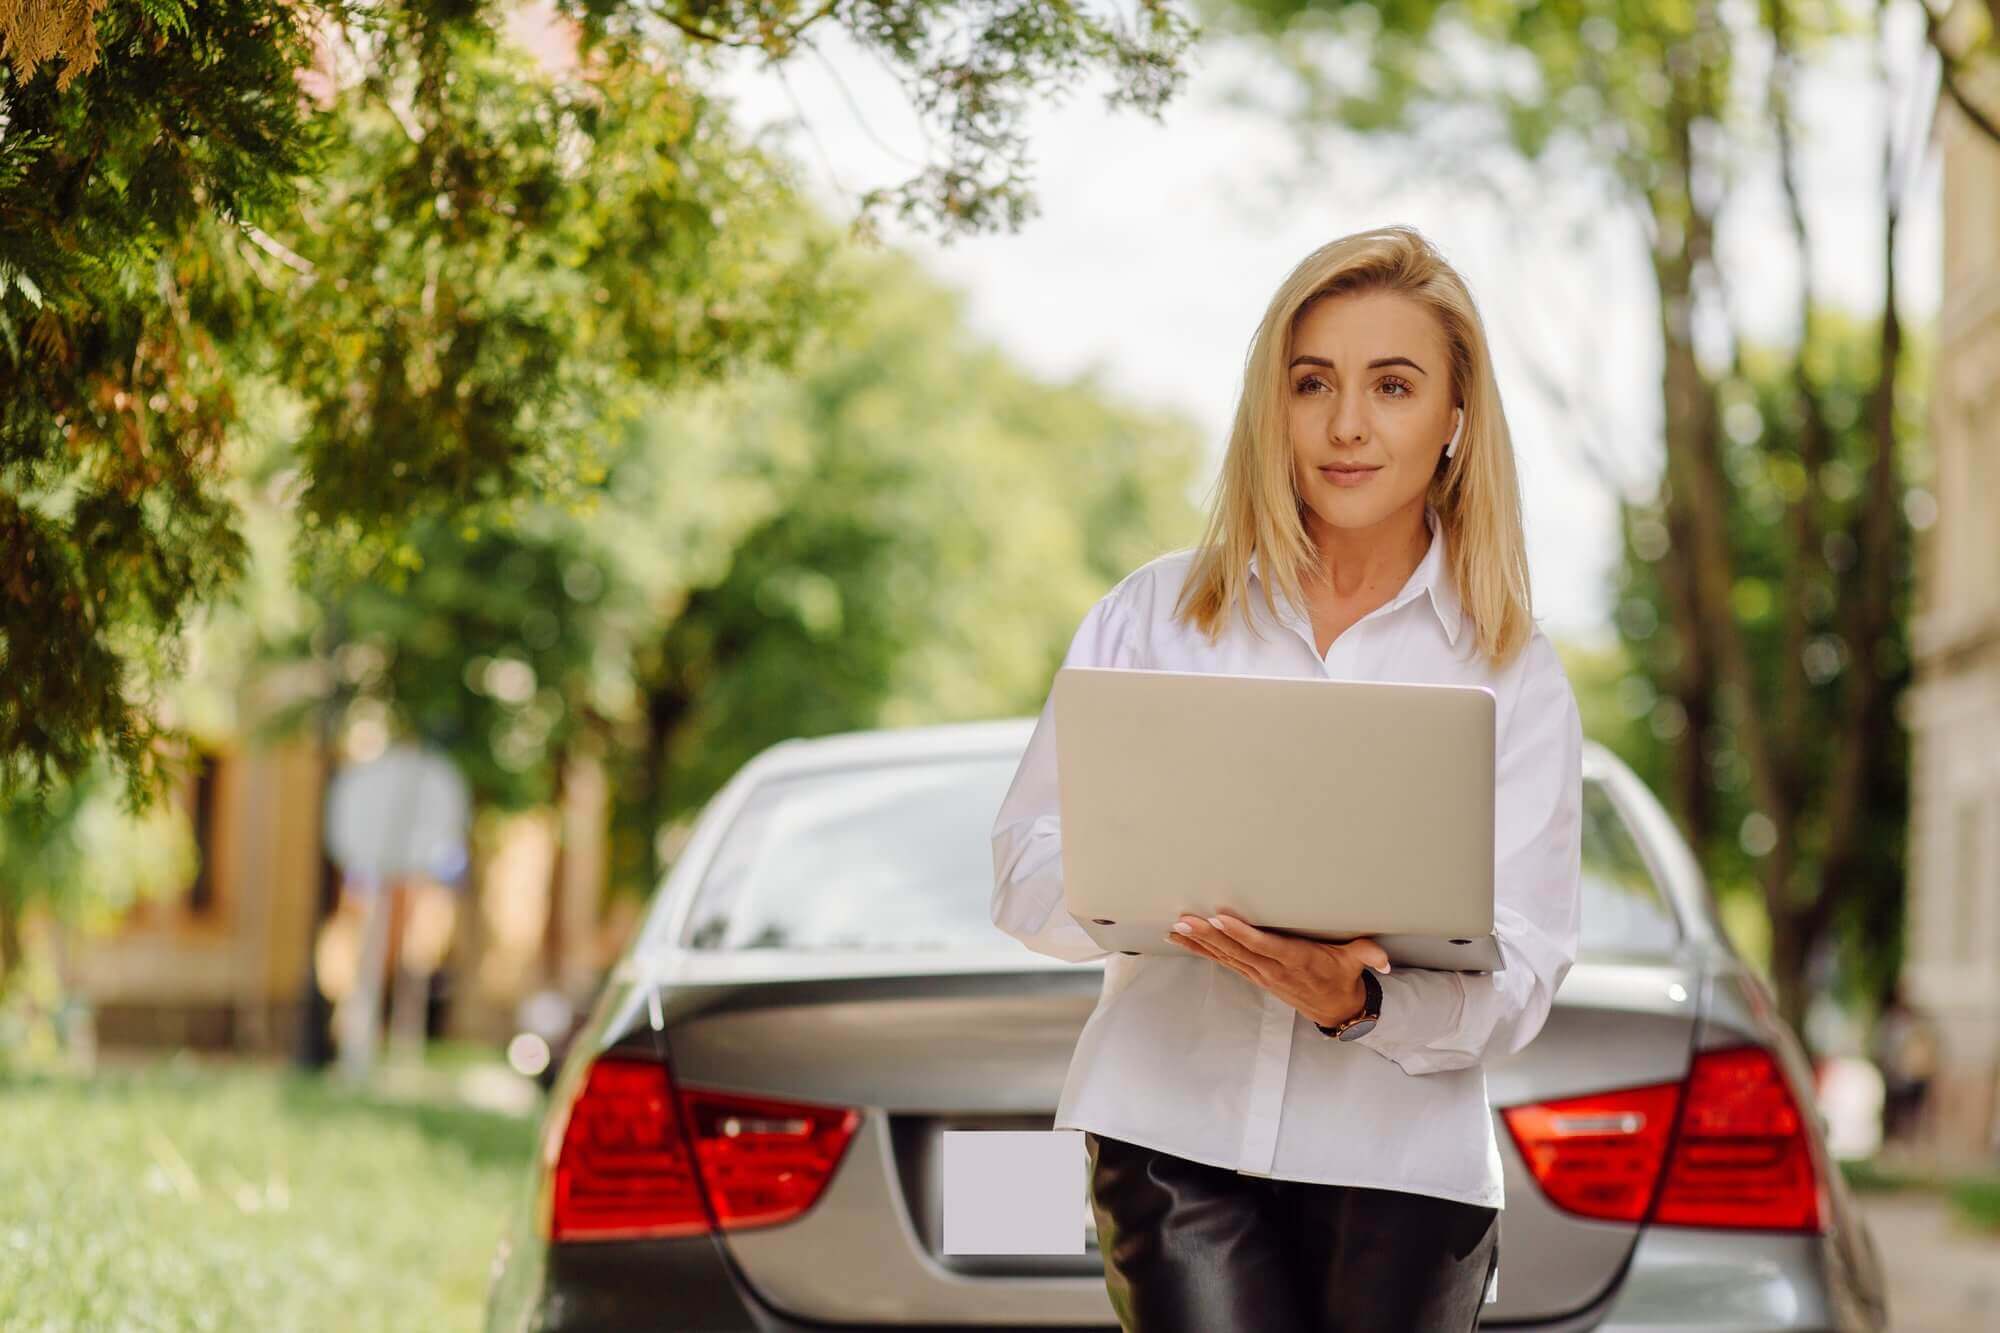 Woman stood by car boot holding her laptop